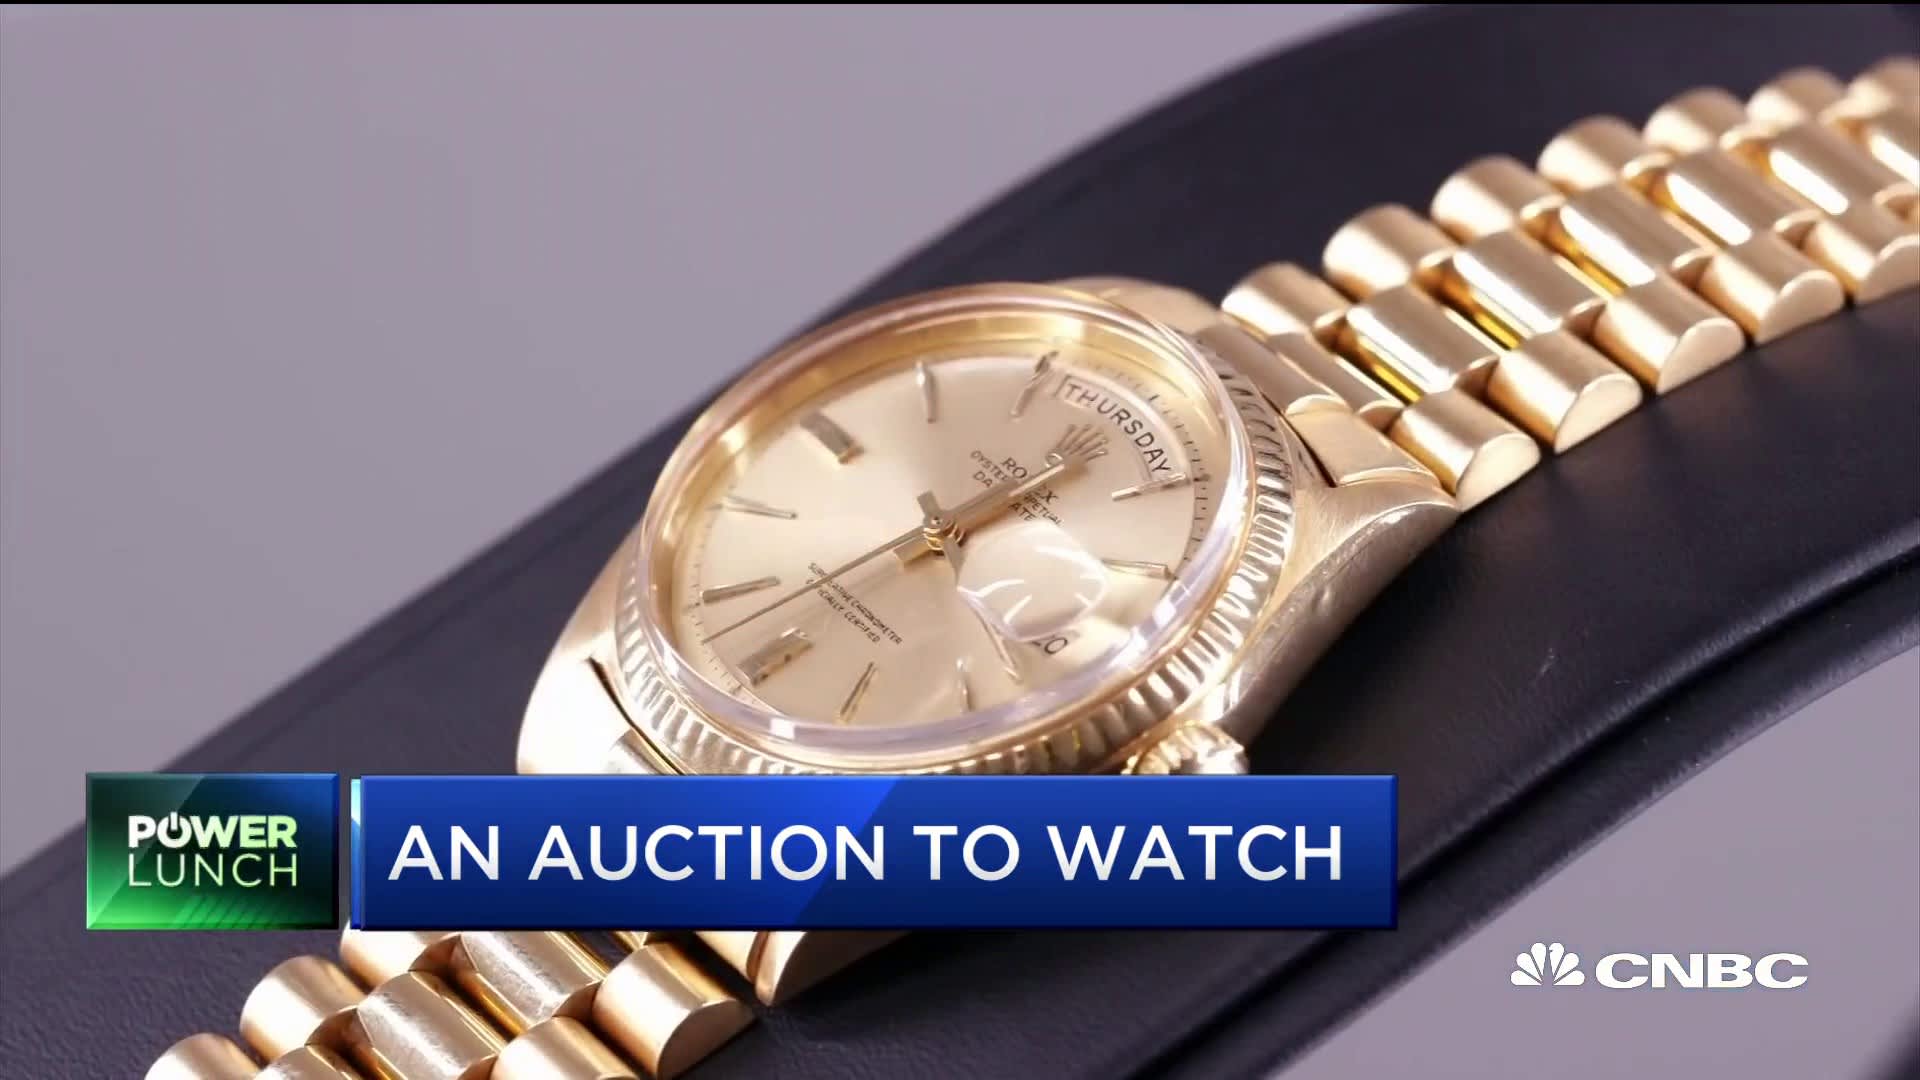 Rolex bought for $350 is worth $700,000: 'Antiques Roadshow'